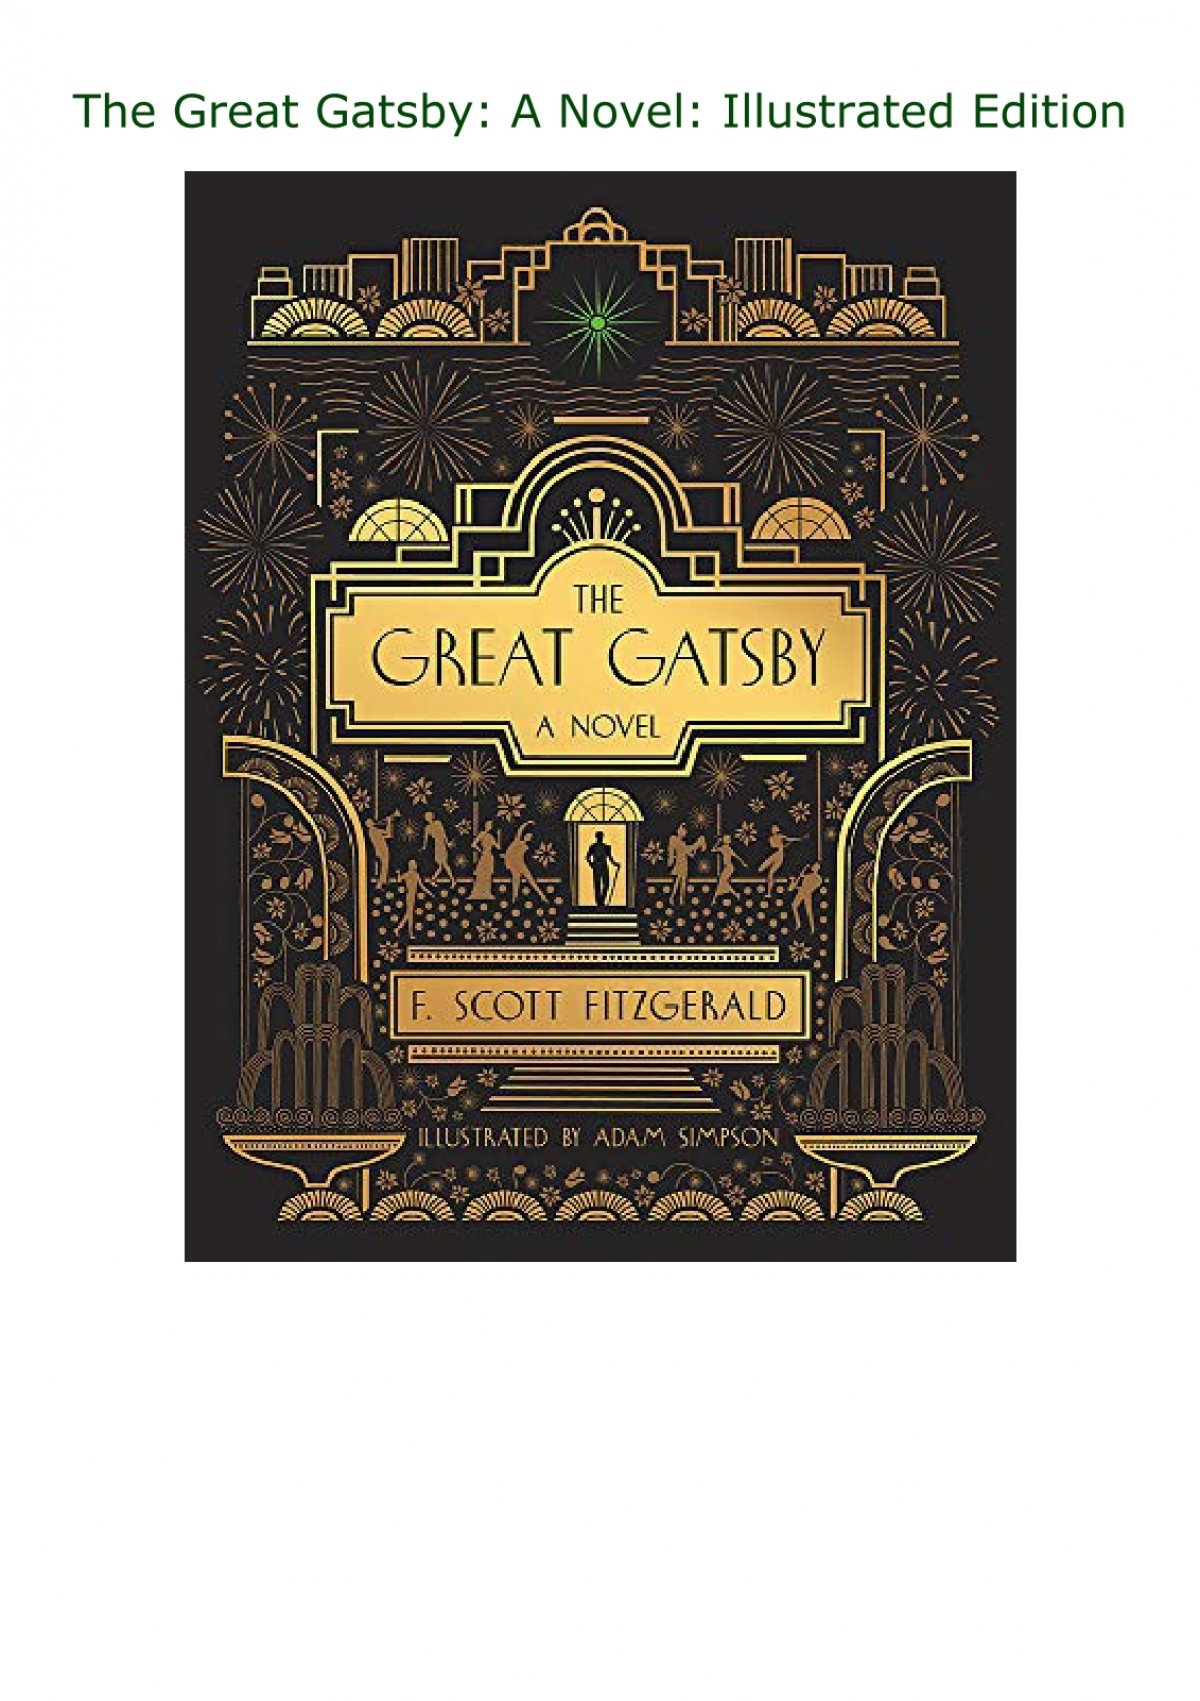 great gatsby illustrated edition pdf download